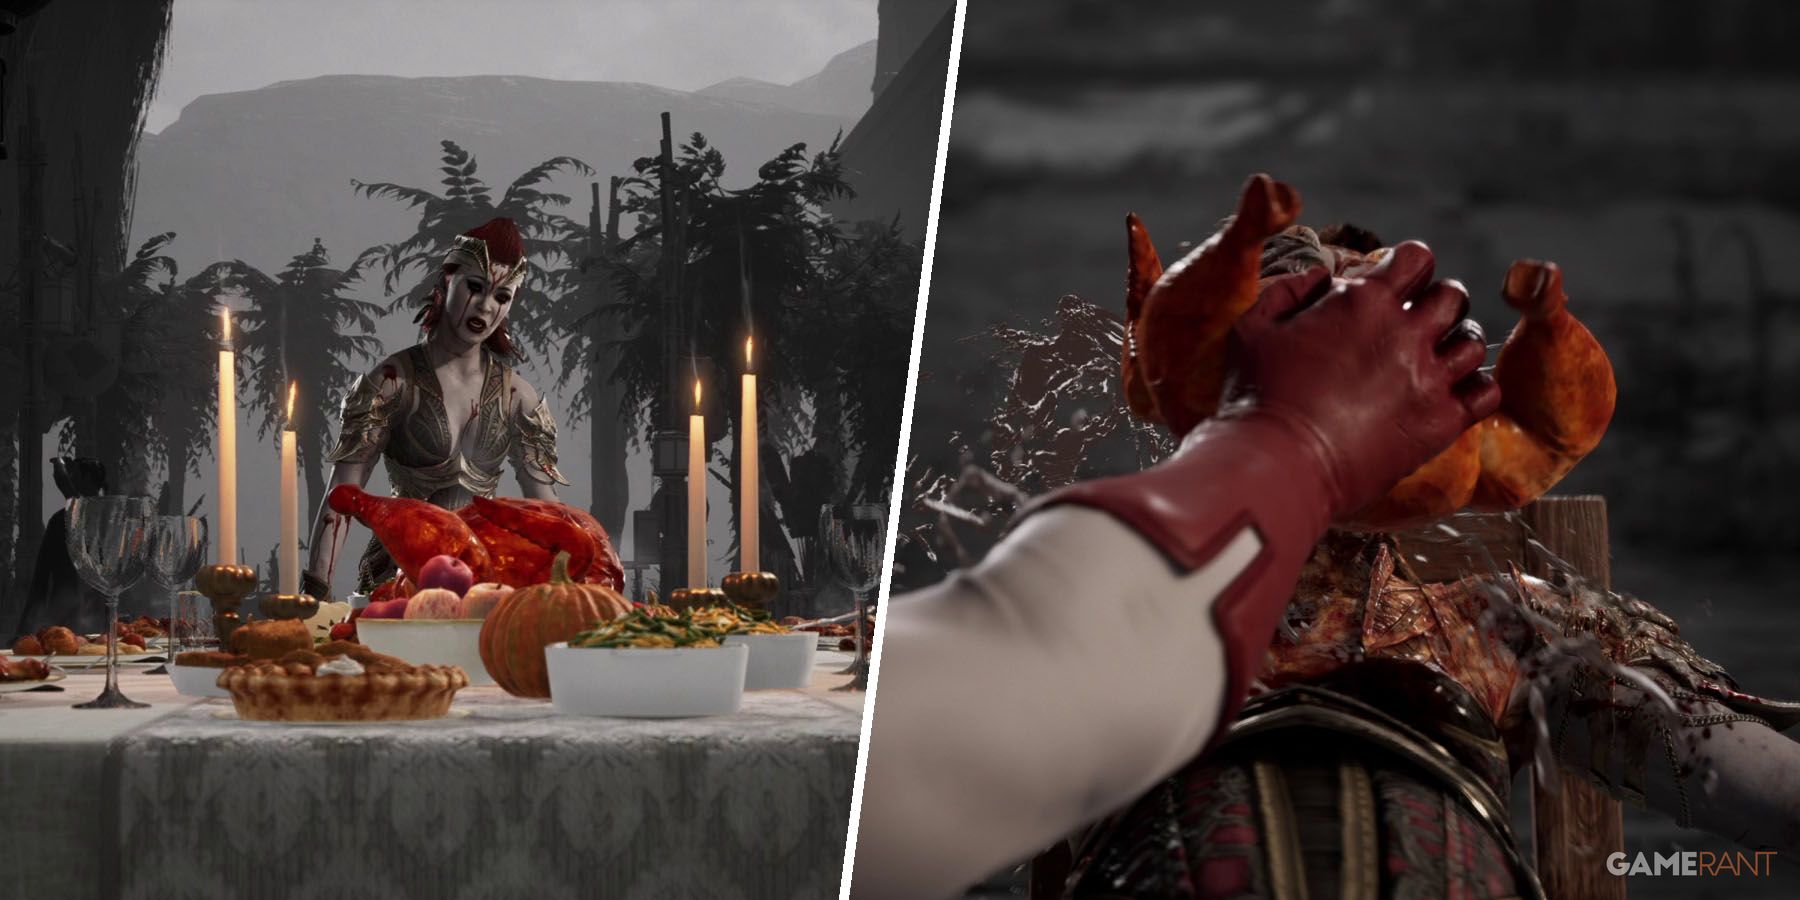 The Thanksgiving fatality in Mortal Kombat 1